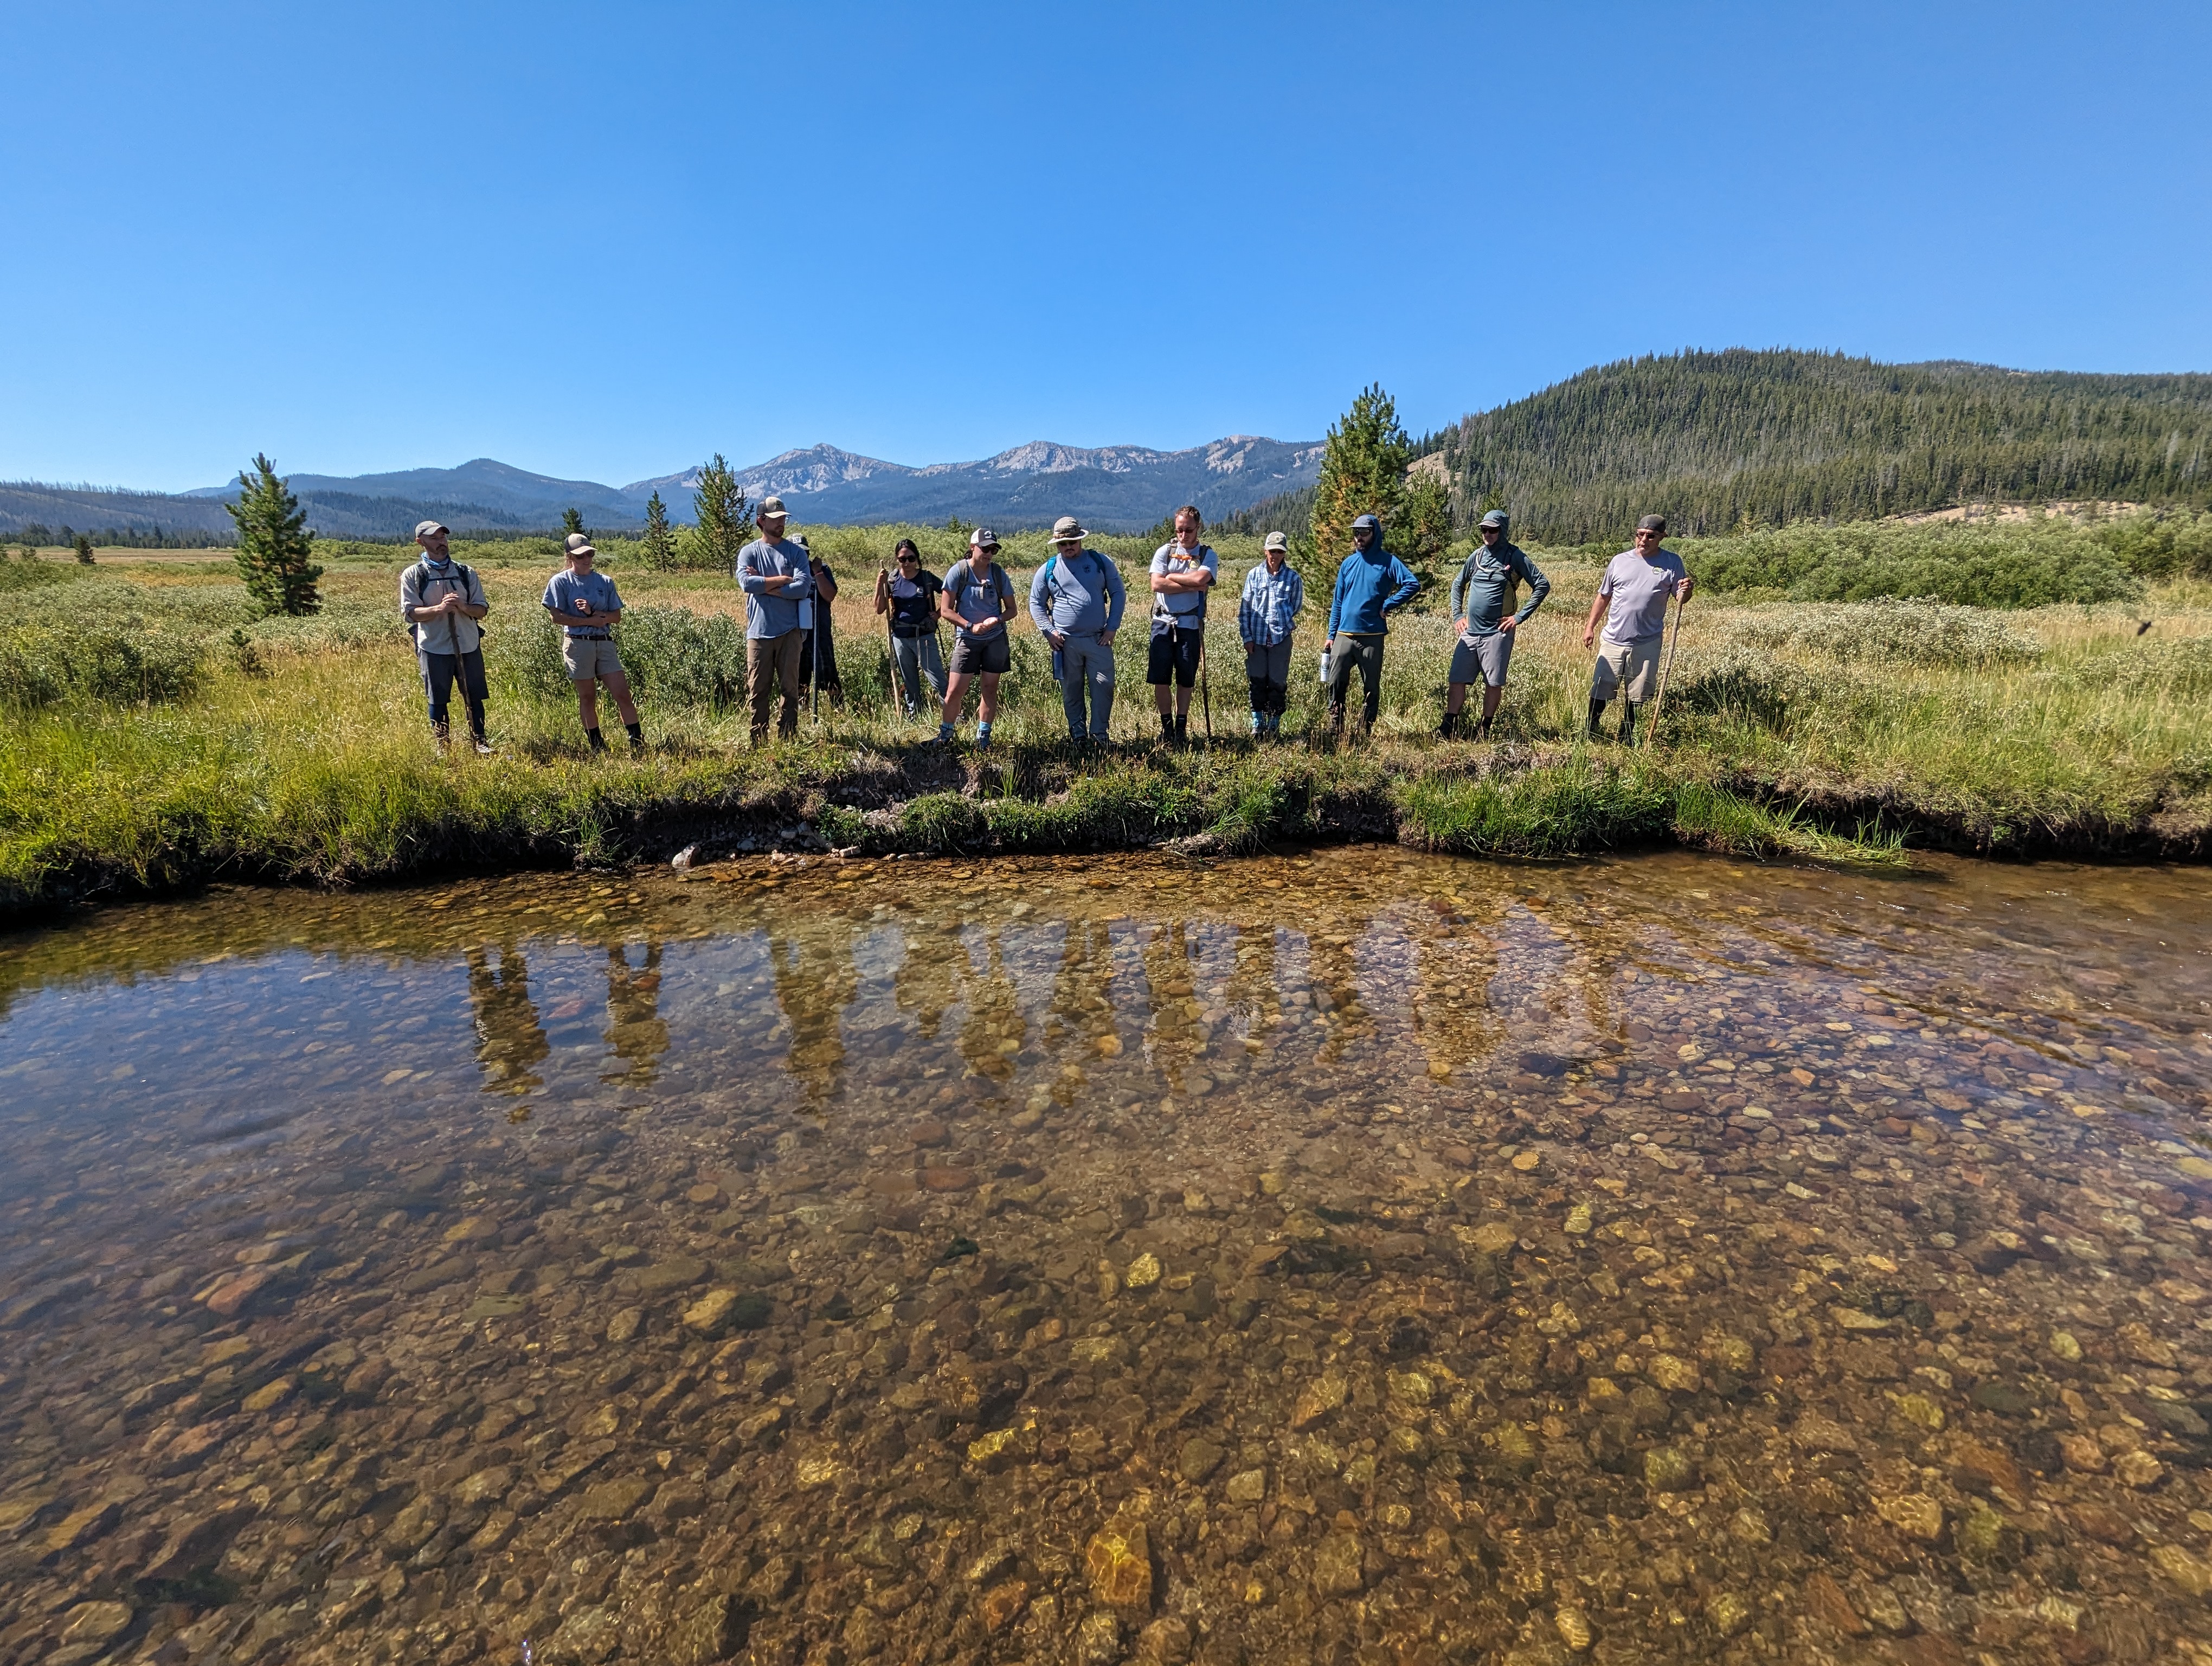 Fisheries biologists gathered at the bank of a stream on a sunny day and are gazing at a salmon redd visible in the stream